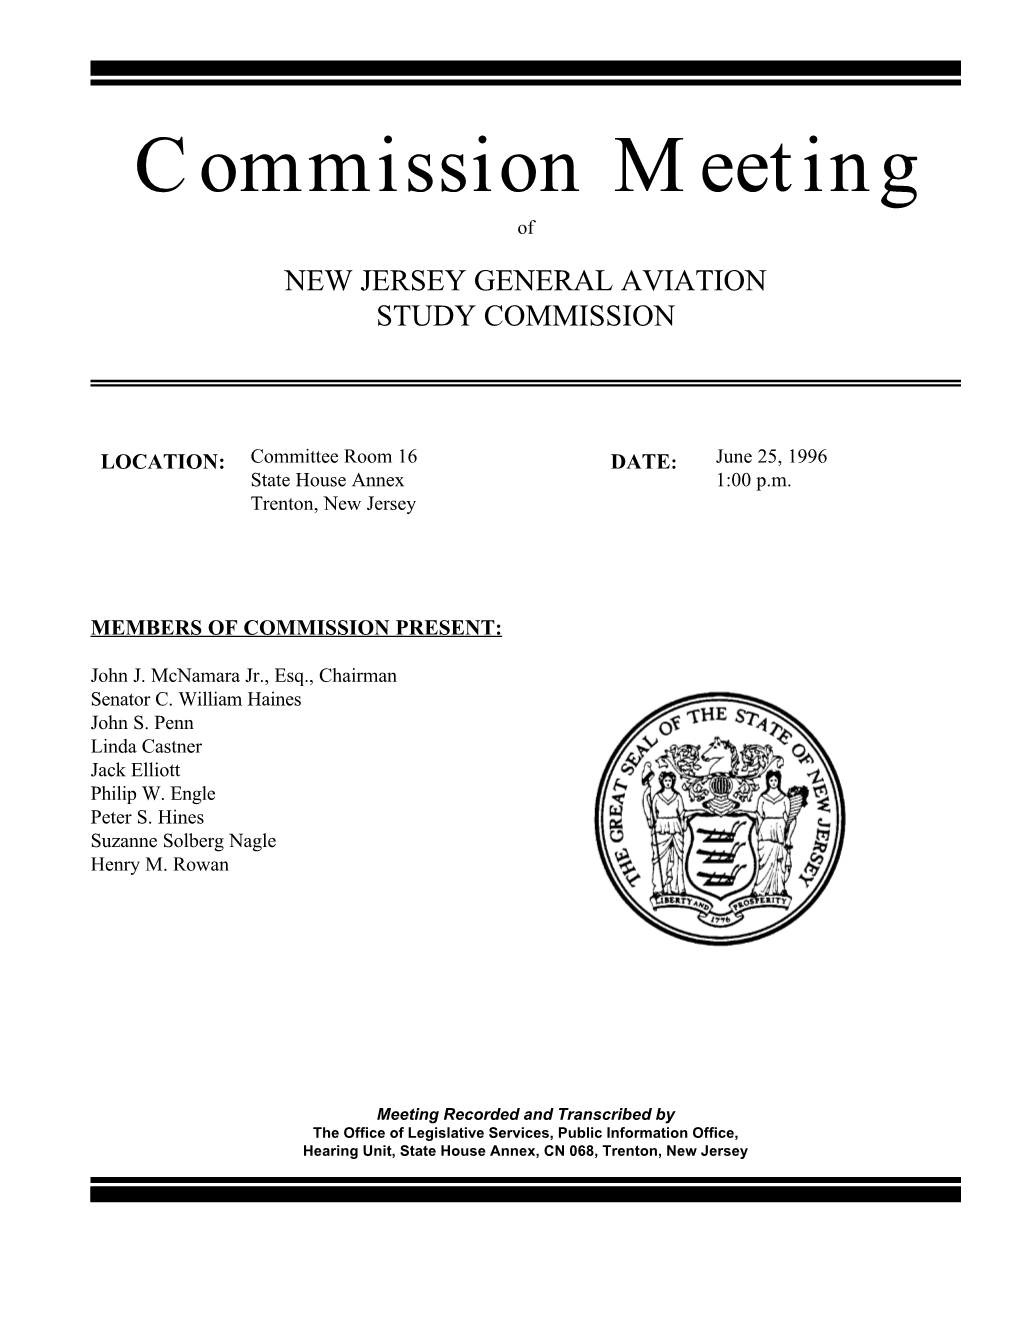 Commission Meeting of NEW JERSEY GENERAL AVIATION STUDY COMMISSION